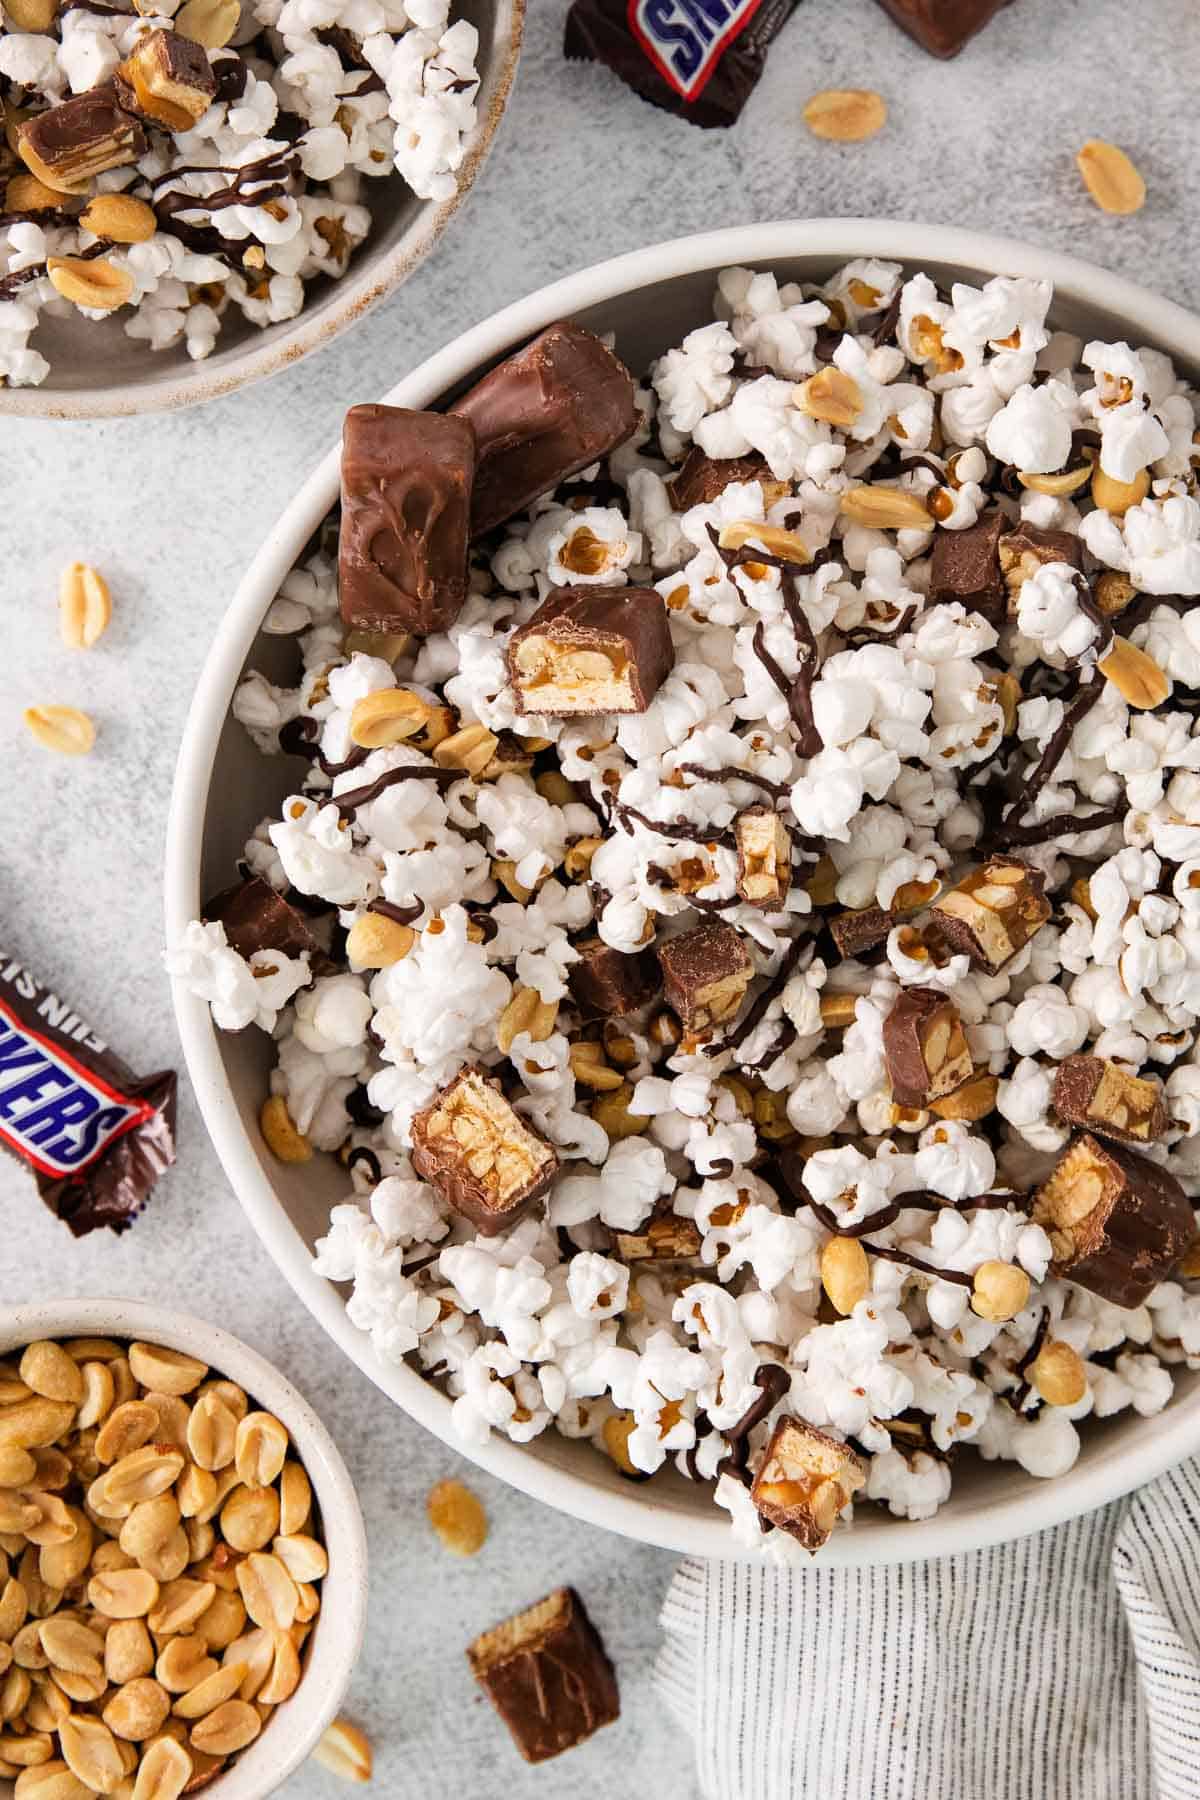 Snickers popcorn in a bowl with a Snickers bar and peanuts on the side